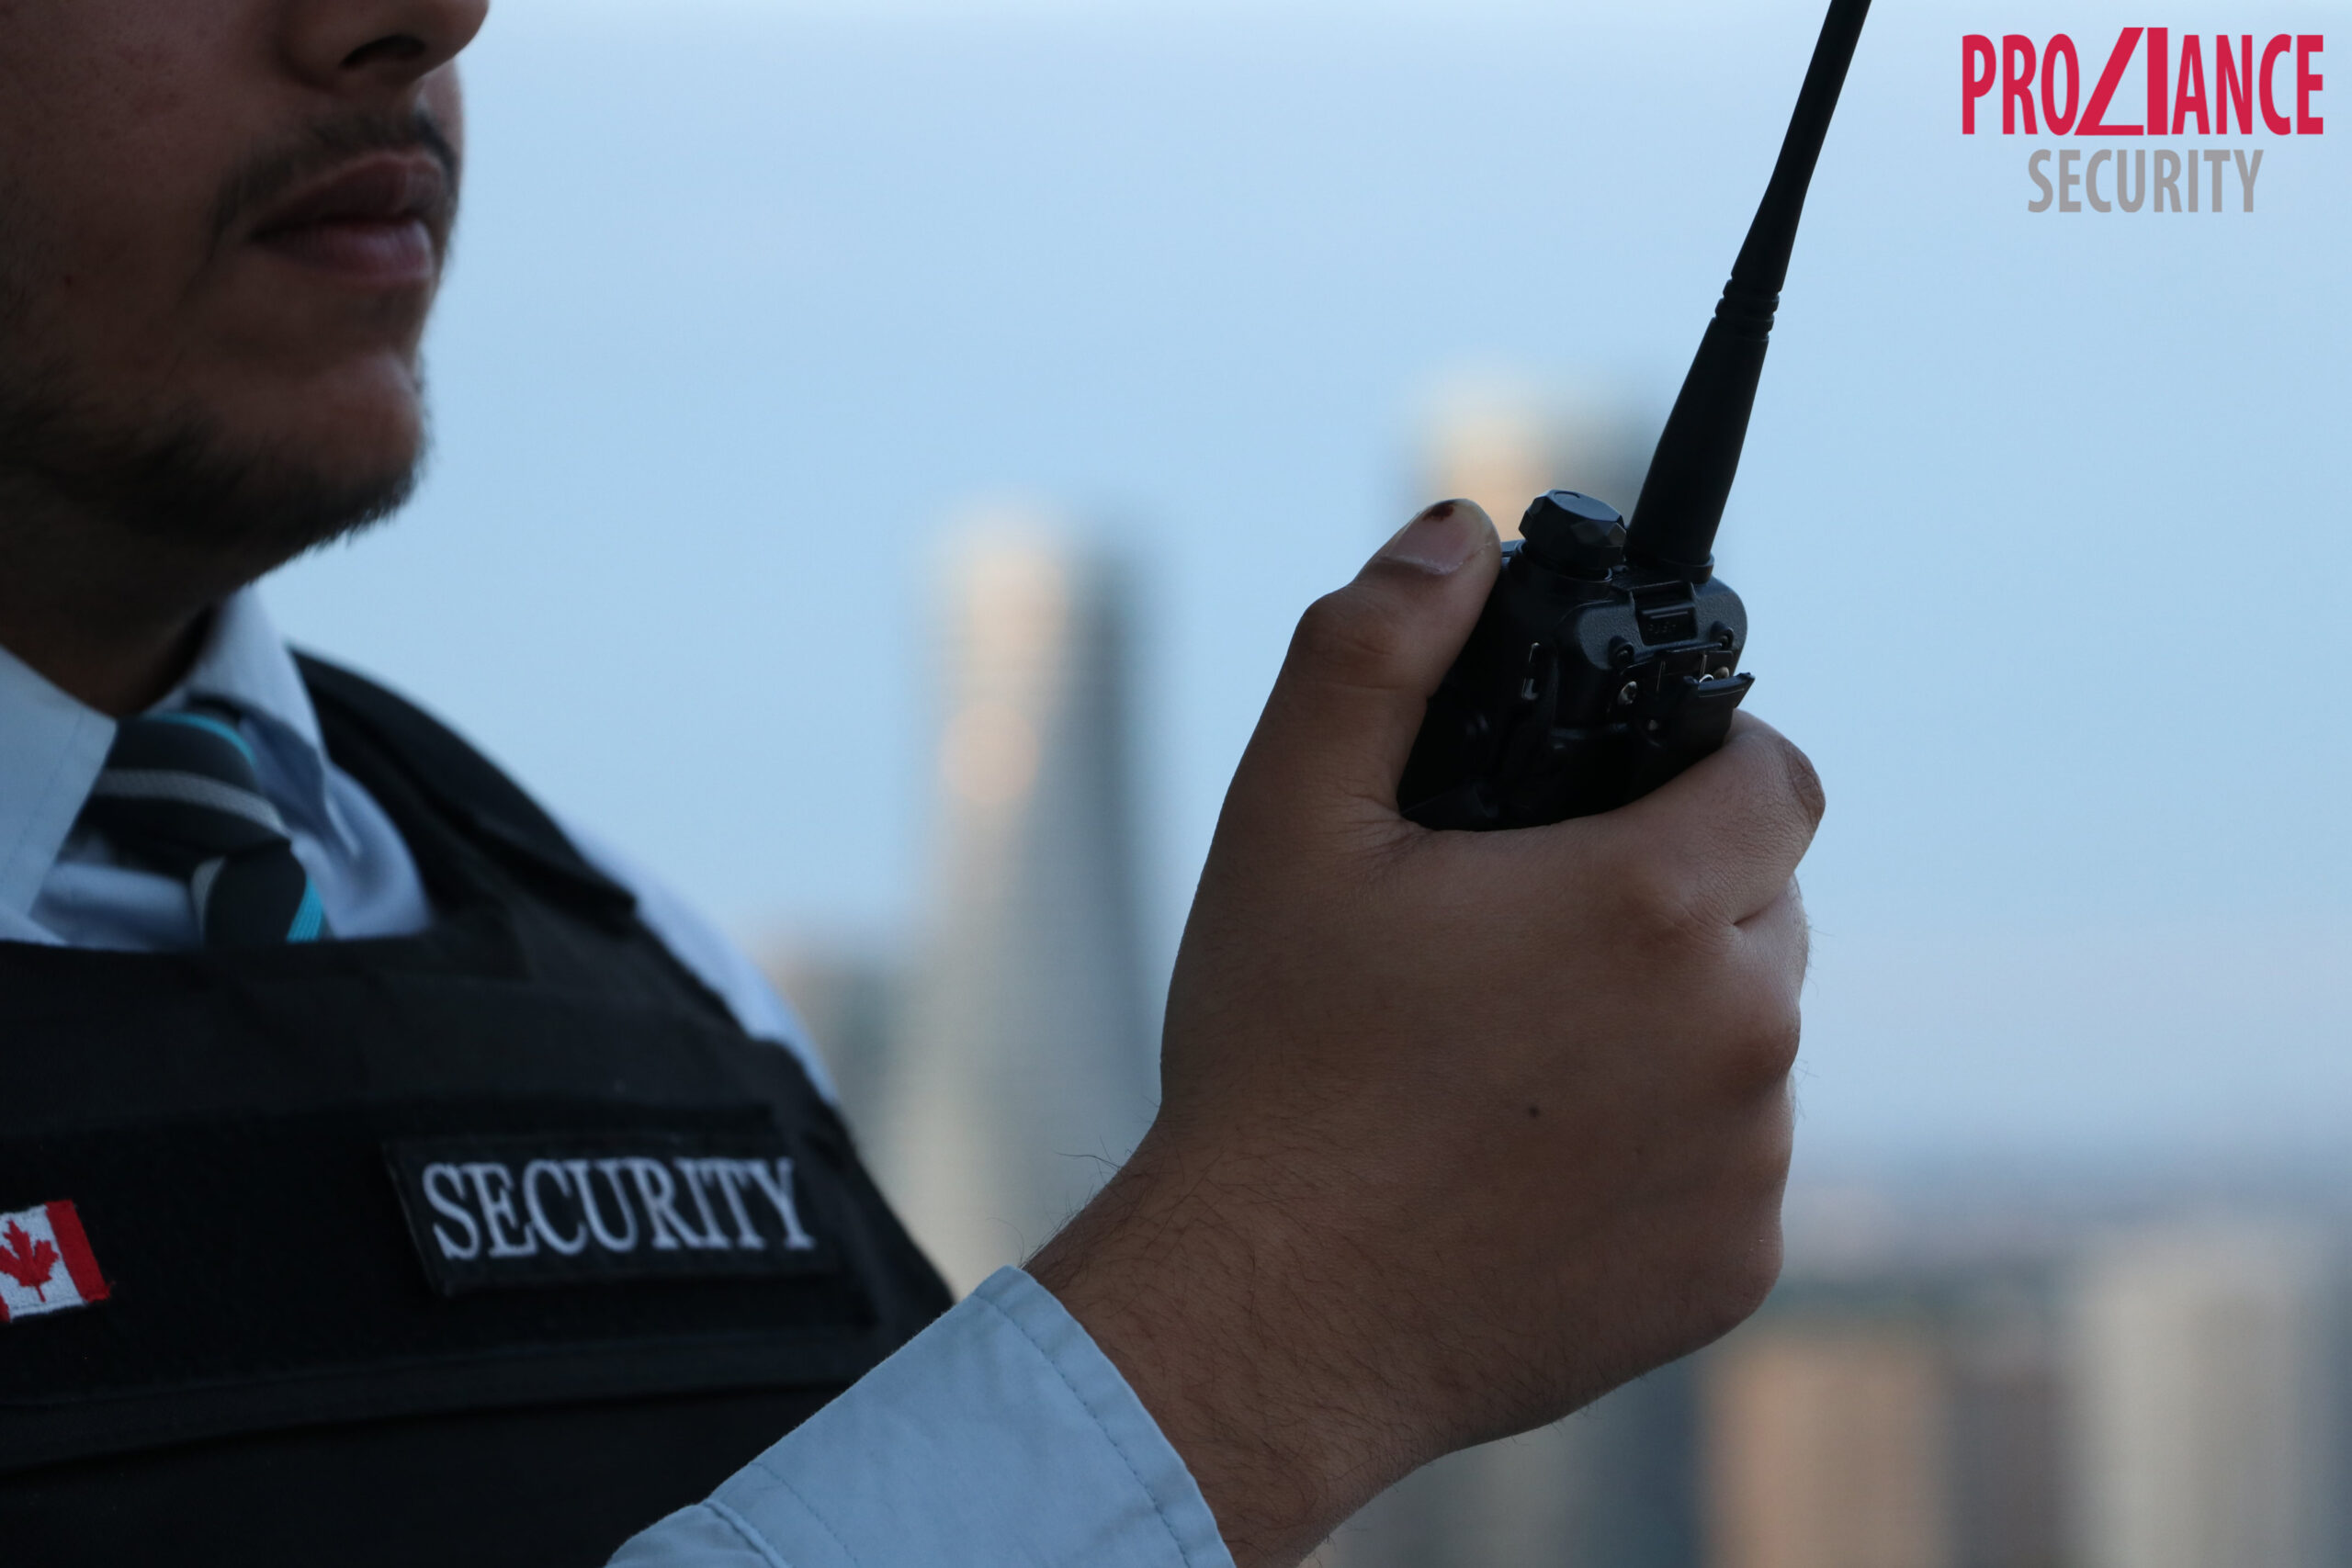 INDUSTRIES – PROLIANCE SECURITY SERVICES